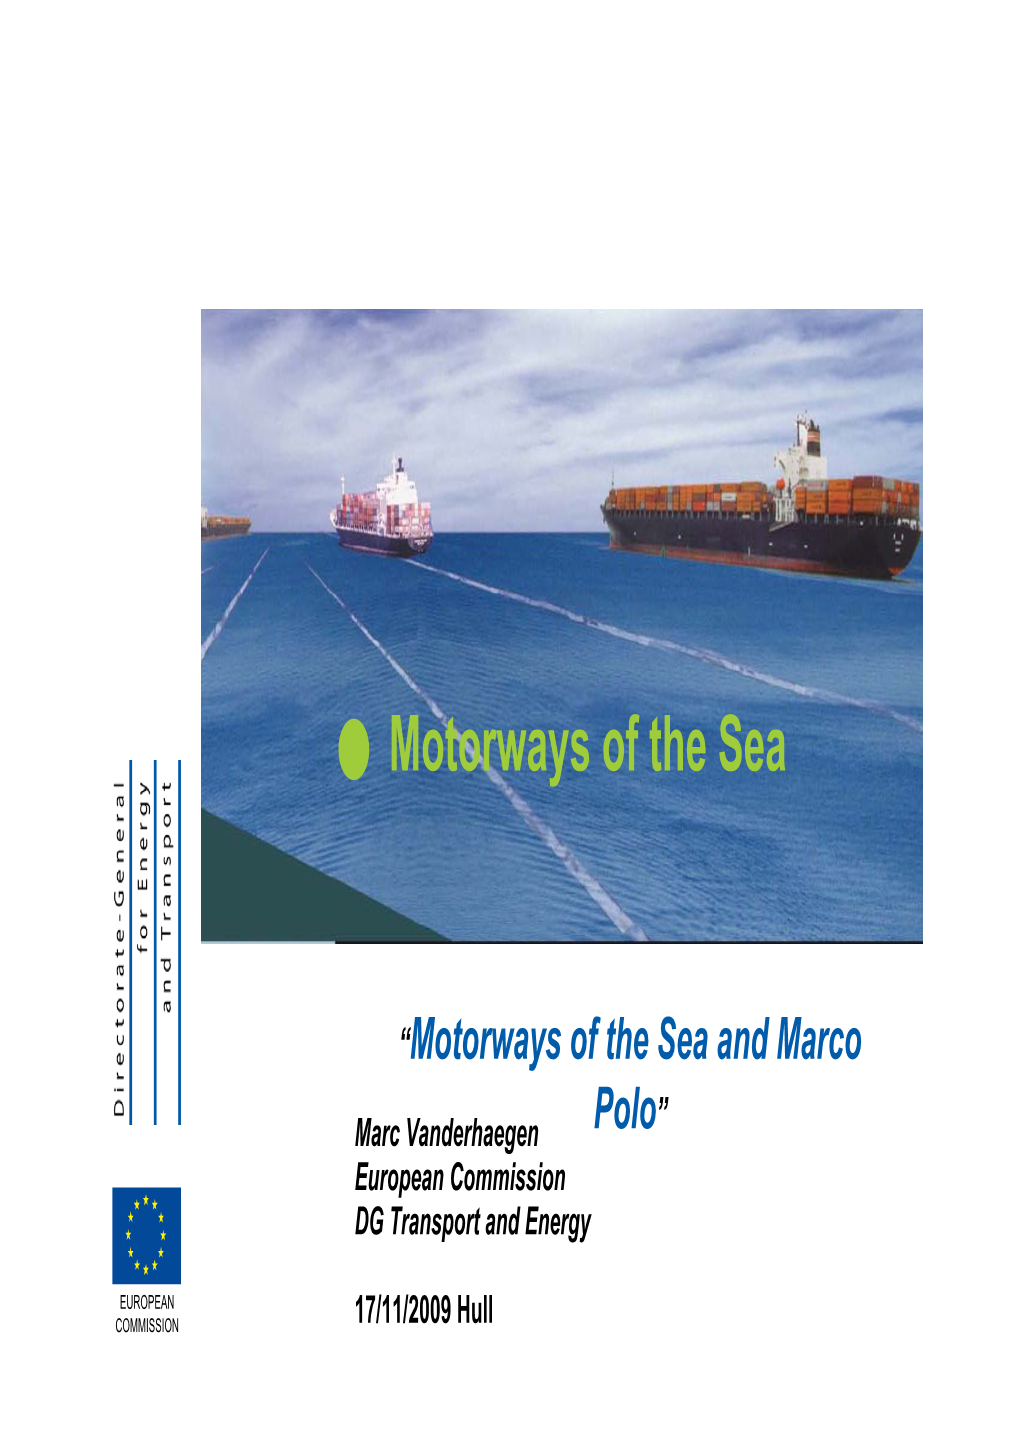 Motorways of the Sea and Marco